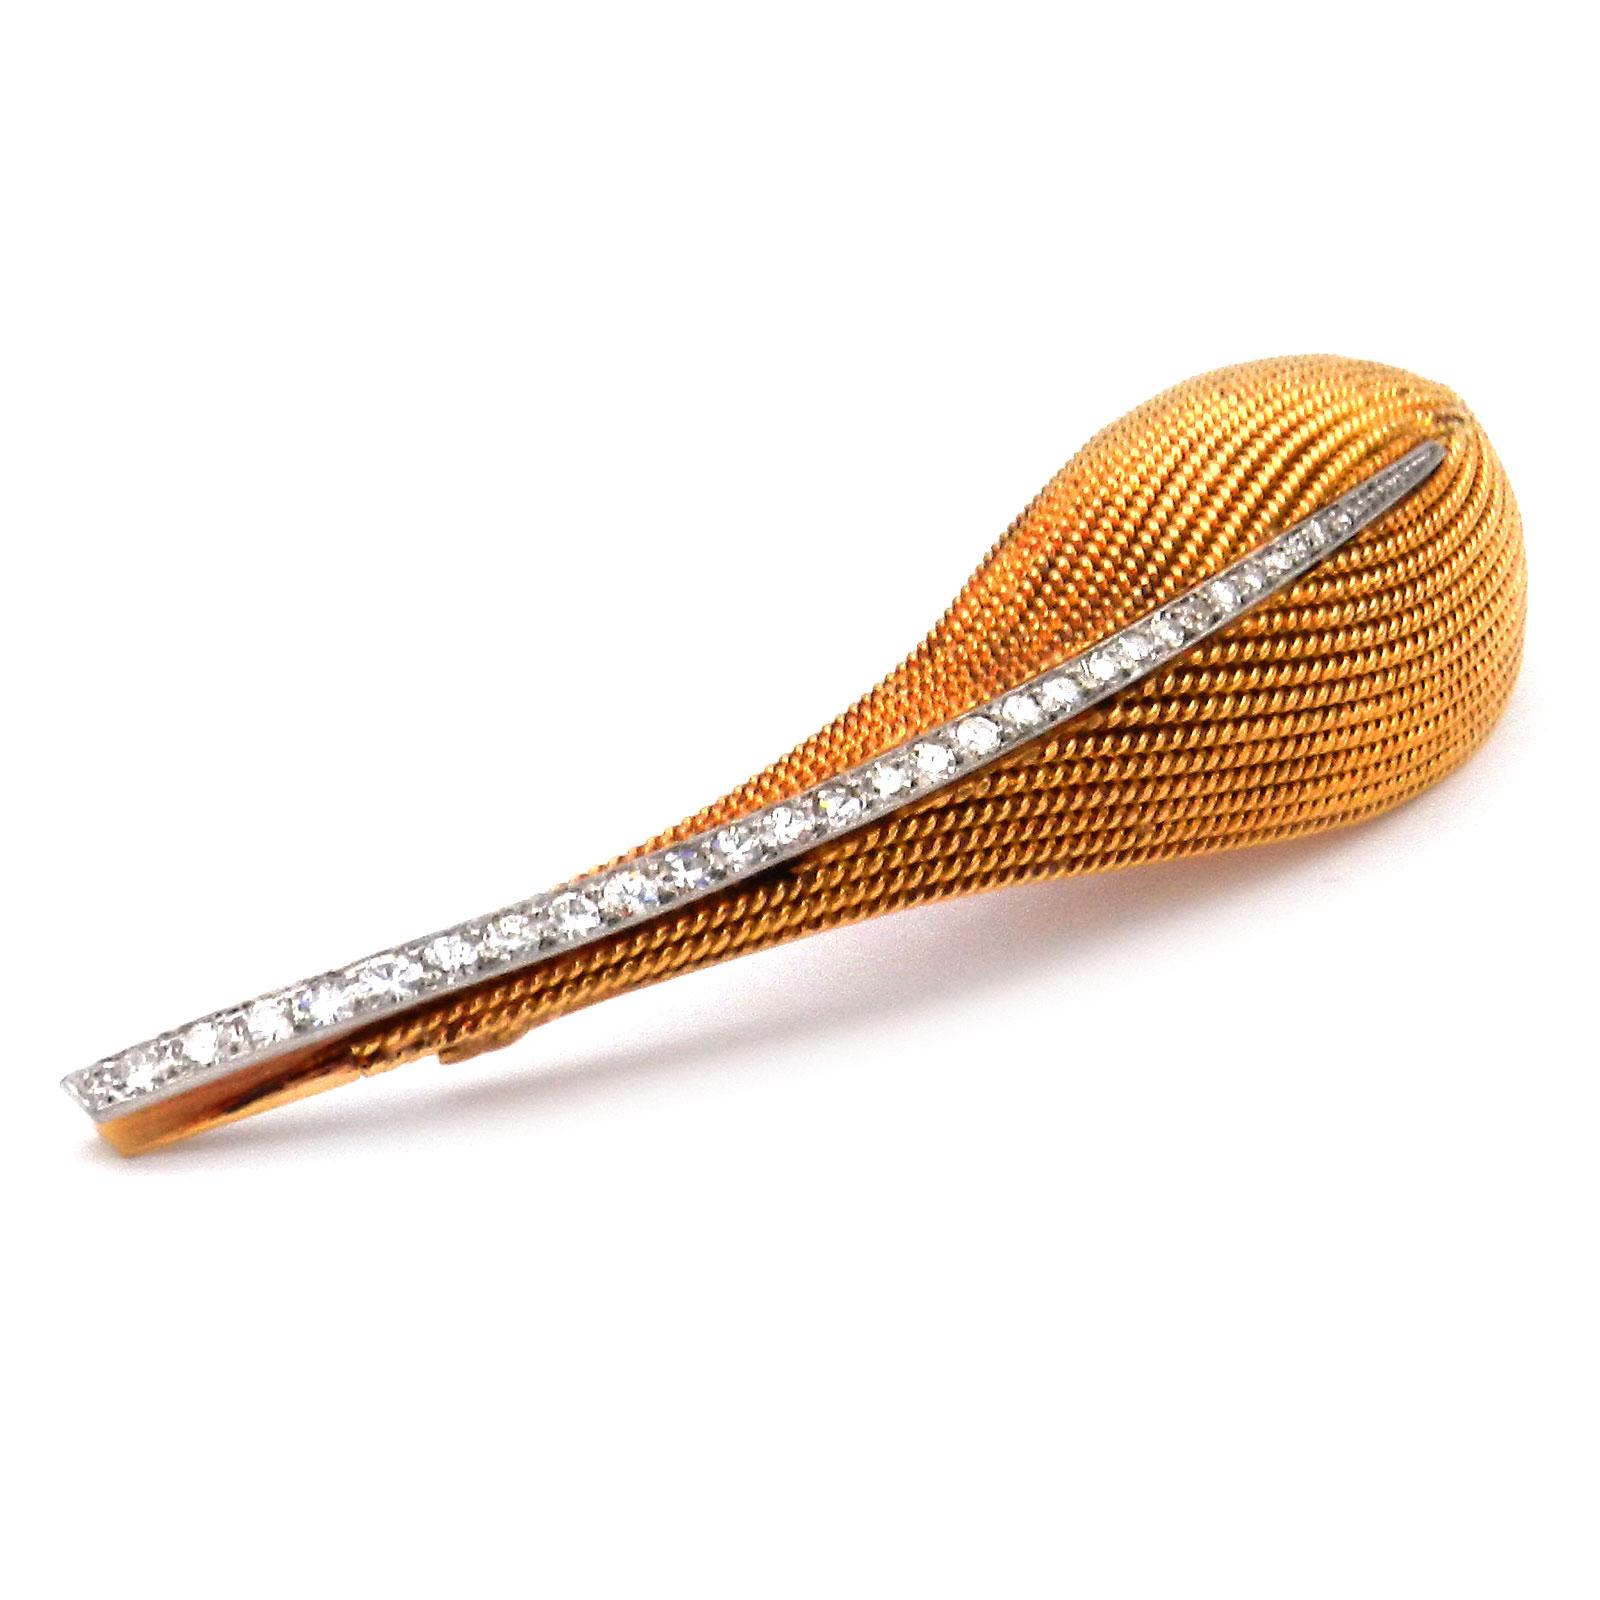 Boucheron Retro Diamond Leaf 18K Gold Brooch circa 1945

This classically elegant and very representative diamond brooch was created by the Parisian luxury jeweler Boucheron around 1945. The brooch has the shape of a rolled coconut leaf and is